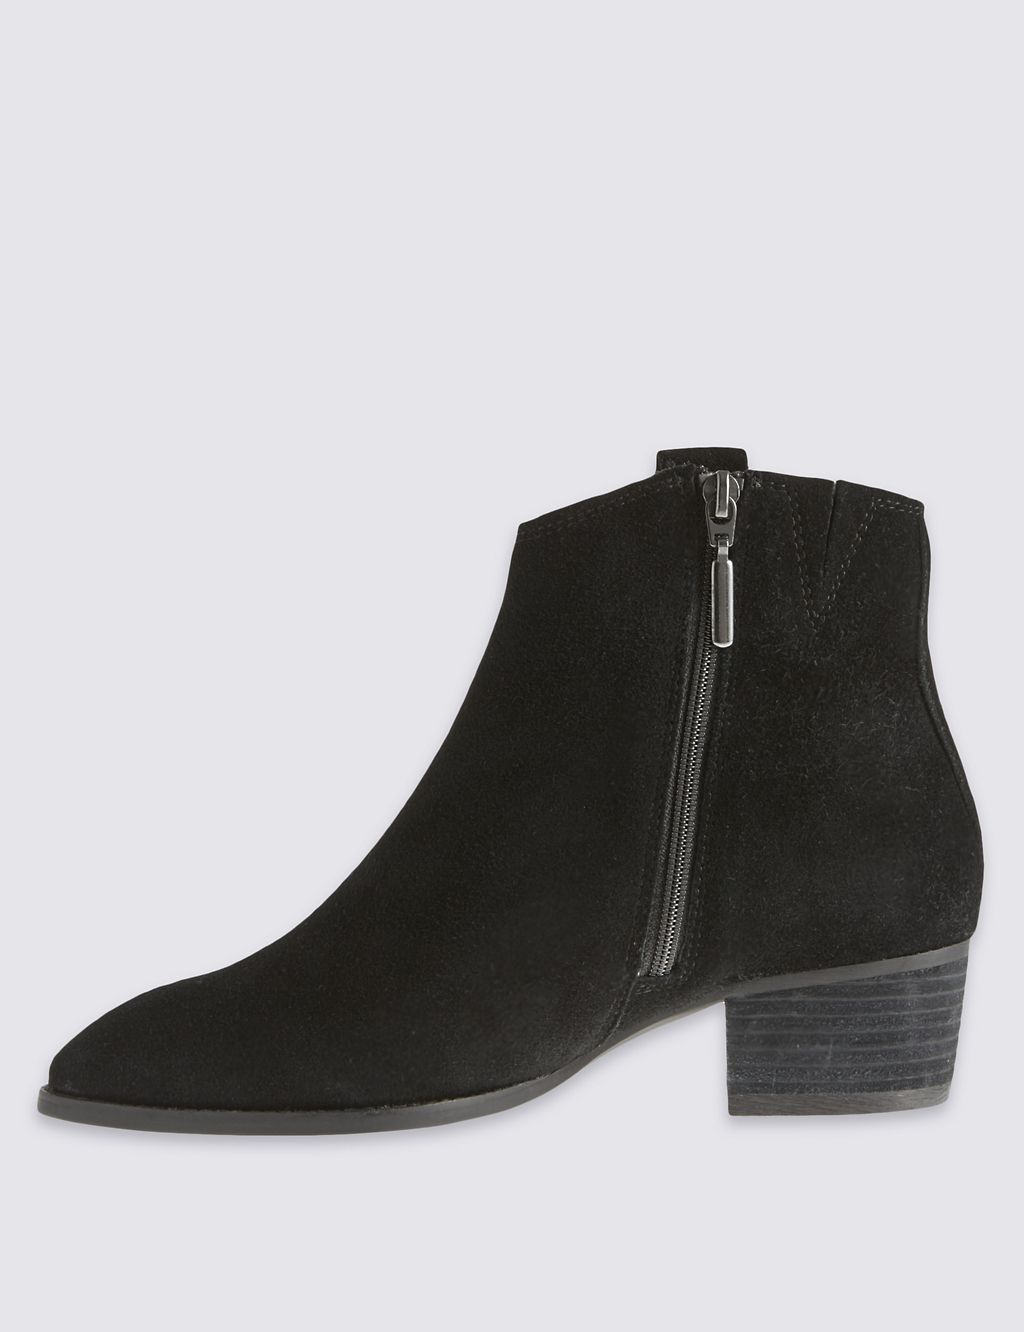 Wide Fit Leather Block Heel Ankle Boots 4 of 5